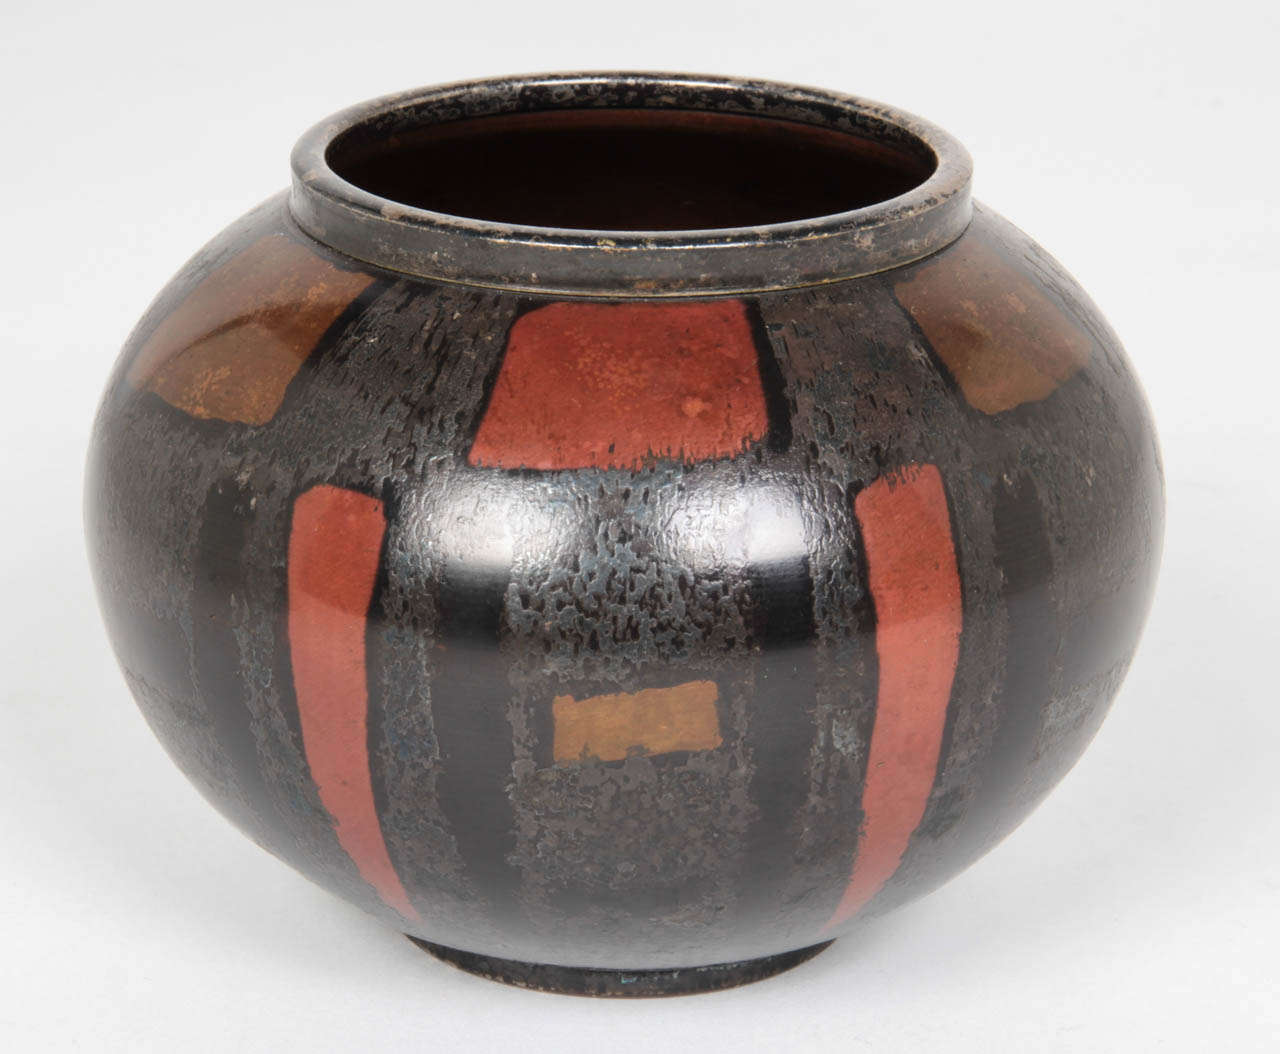 WMF  (Württembergische Metallwarenfabrik)  Geislingen, Germany

Dinanderie vase  c. 1930	
	
Silver-plated copper with with red patinated squares and rectangles on a black-patinated textured background 

Marks: WMF castle mark, IKORA